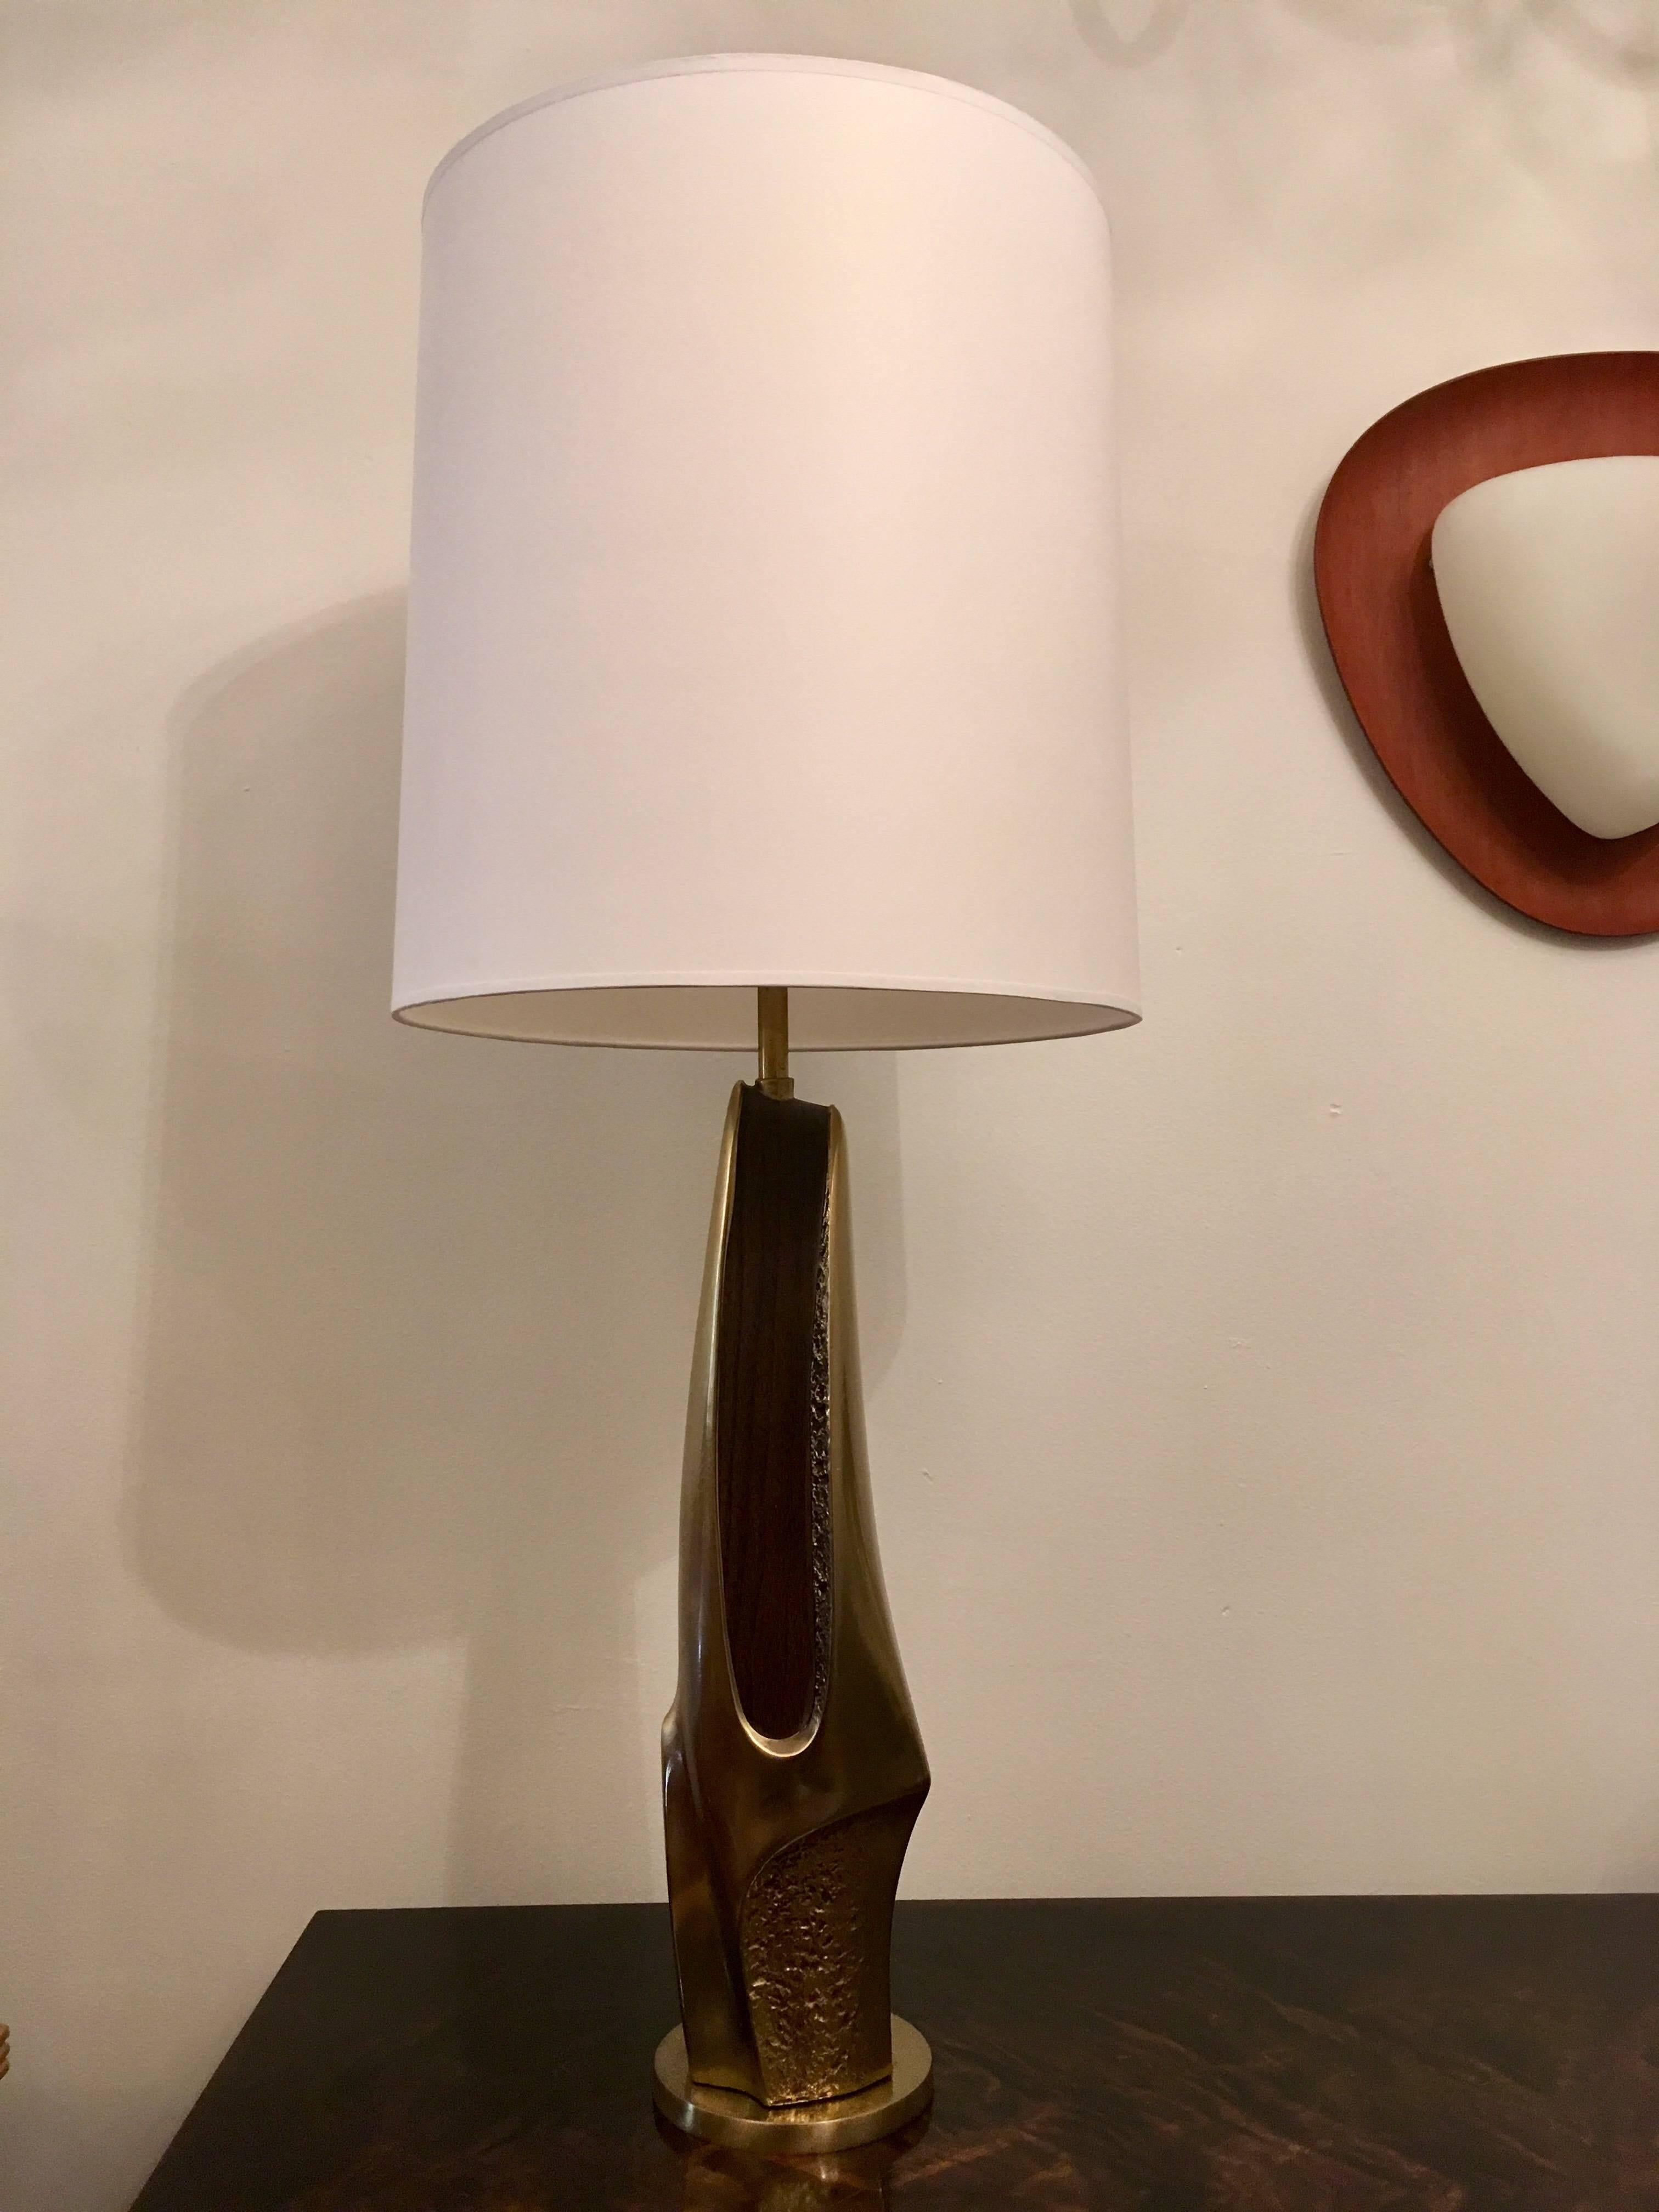 An original pair of brass and walnut sculptural 1970s table lamps by the American lighting firm, Laurel and company. Newly rewired.